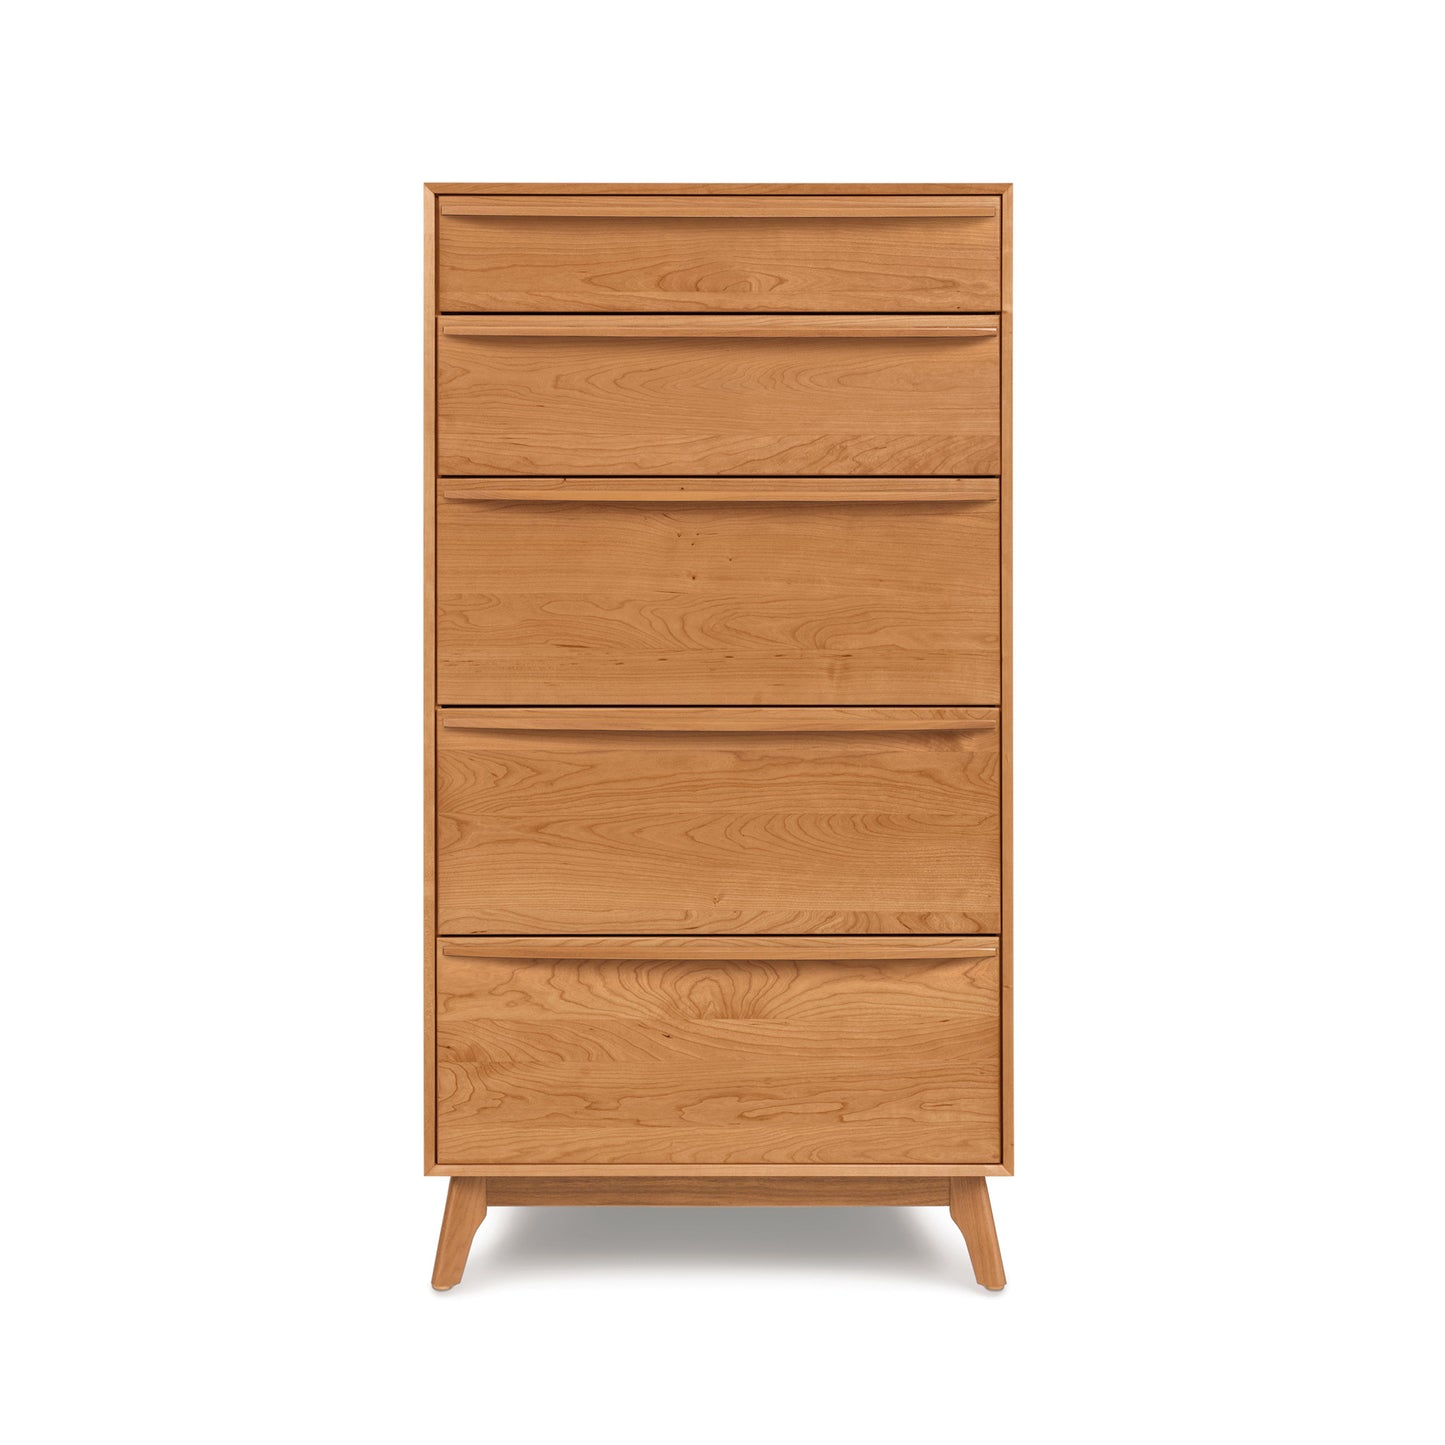 The Copeland Furniture Catalina 5-Drawer Chest is a stunning piece of bedroom furniture with solid wood construction. It features a stylish design and offers ample storage space for all your belongings. Perfect for adding.